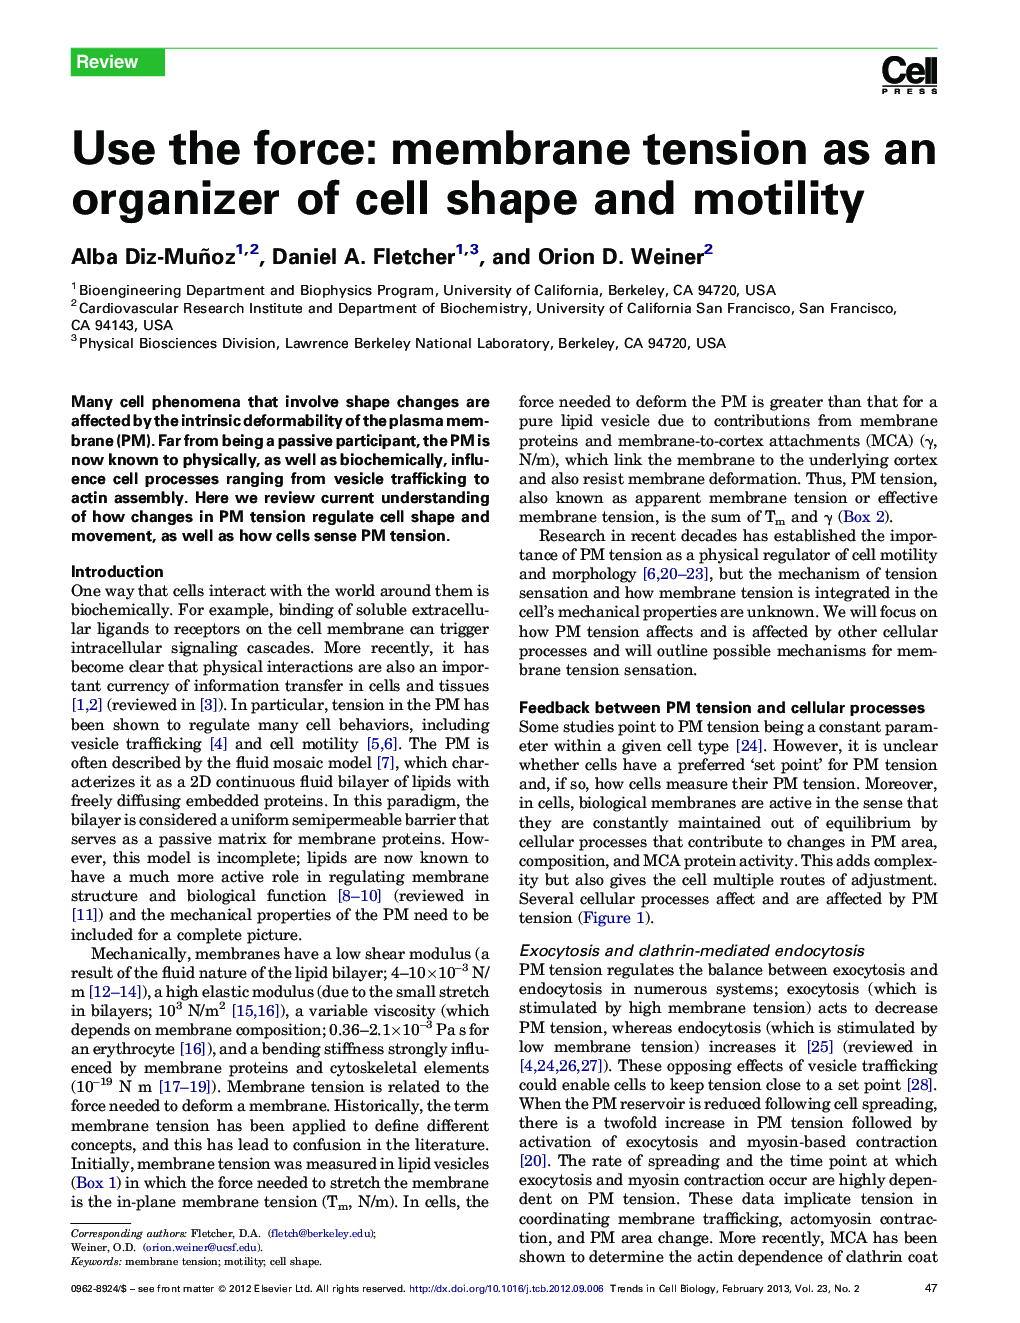 Use the force: membrane tension as an organizer of cell shape and motility